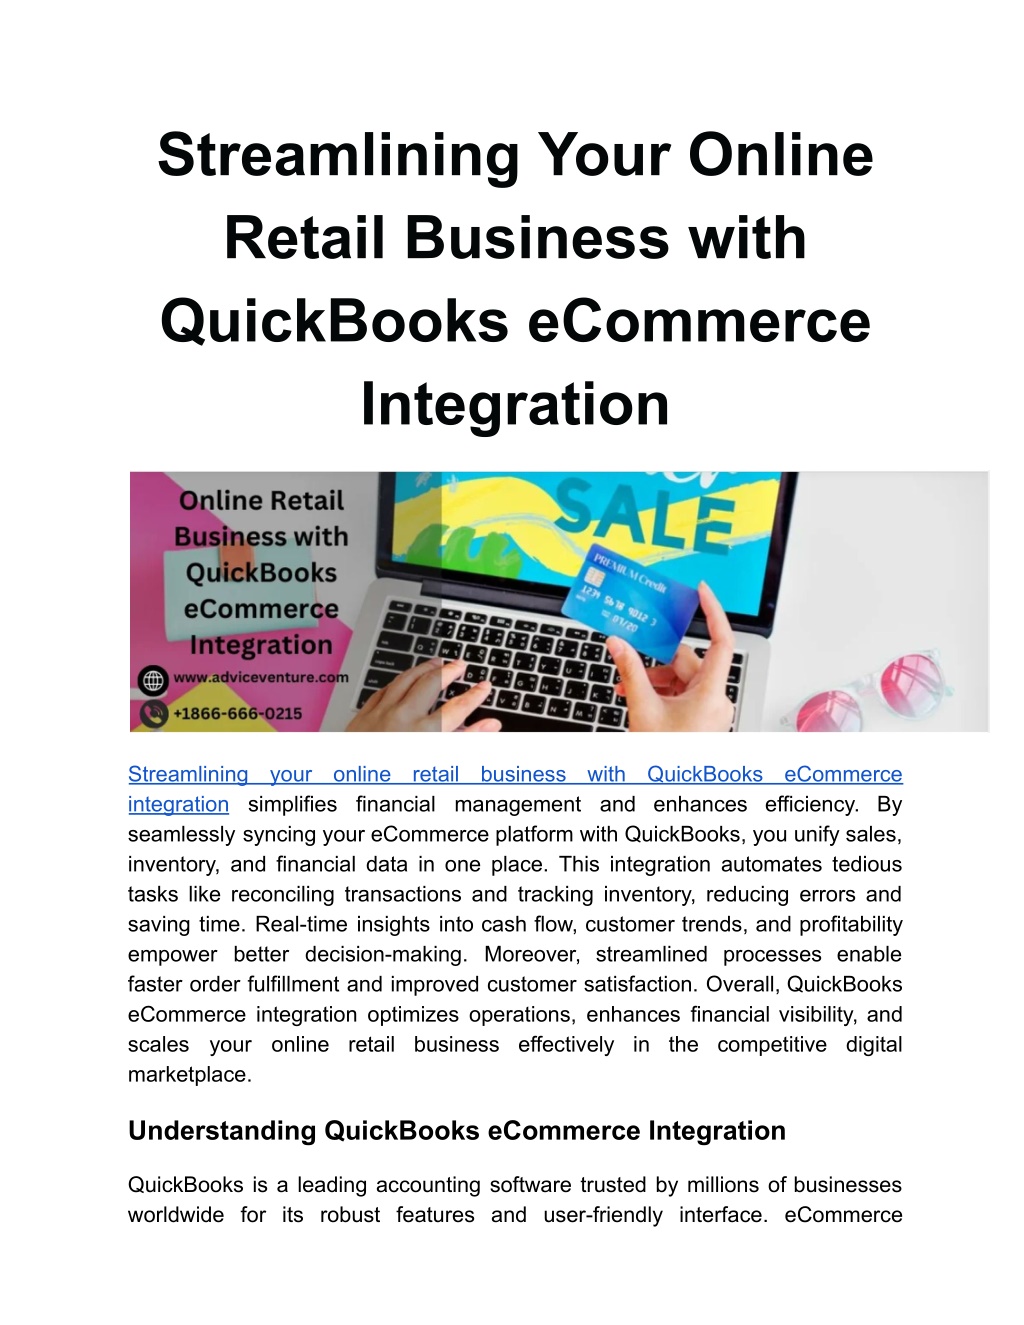 streamlining your online retail business with l.w